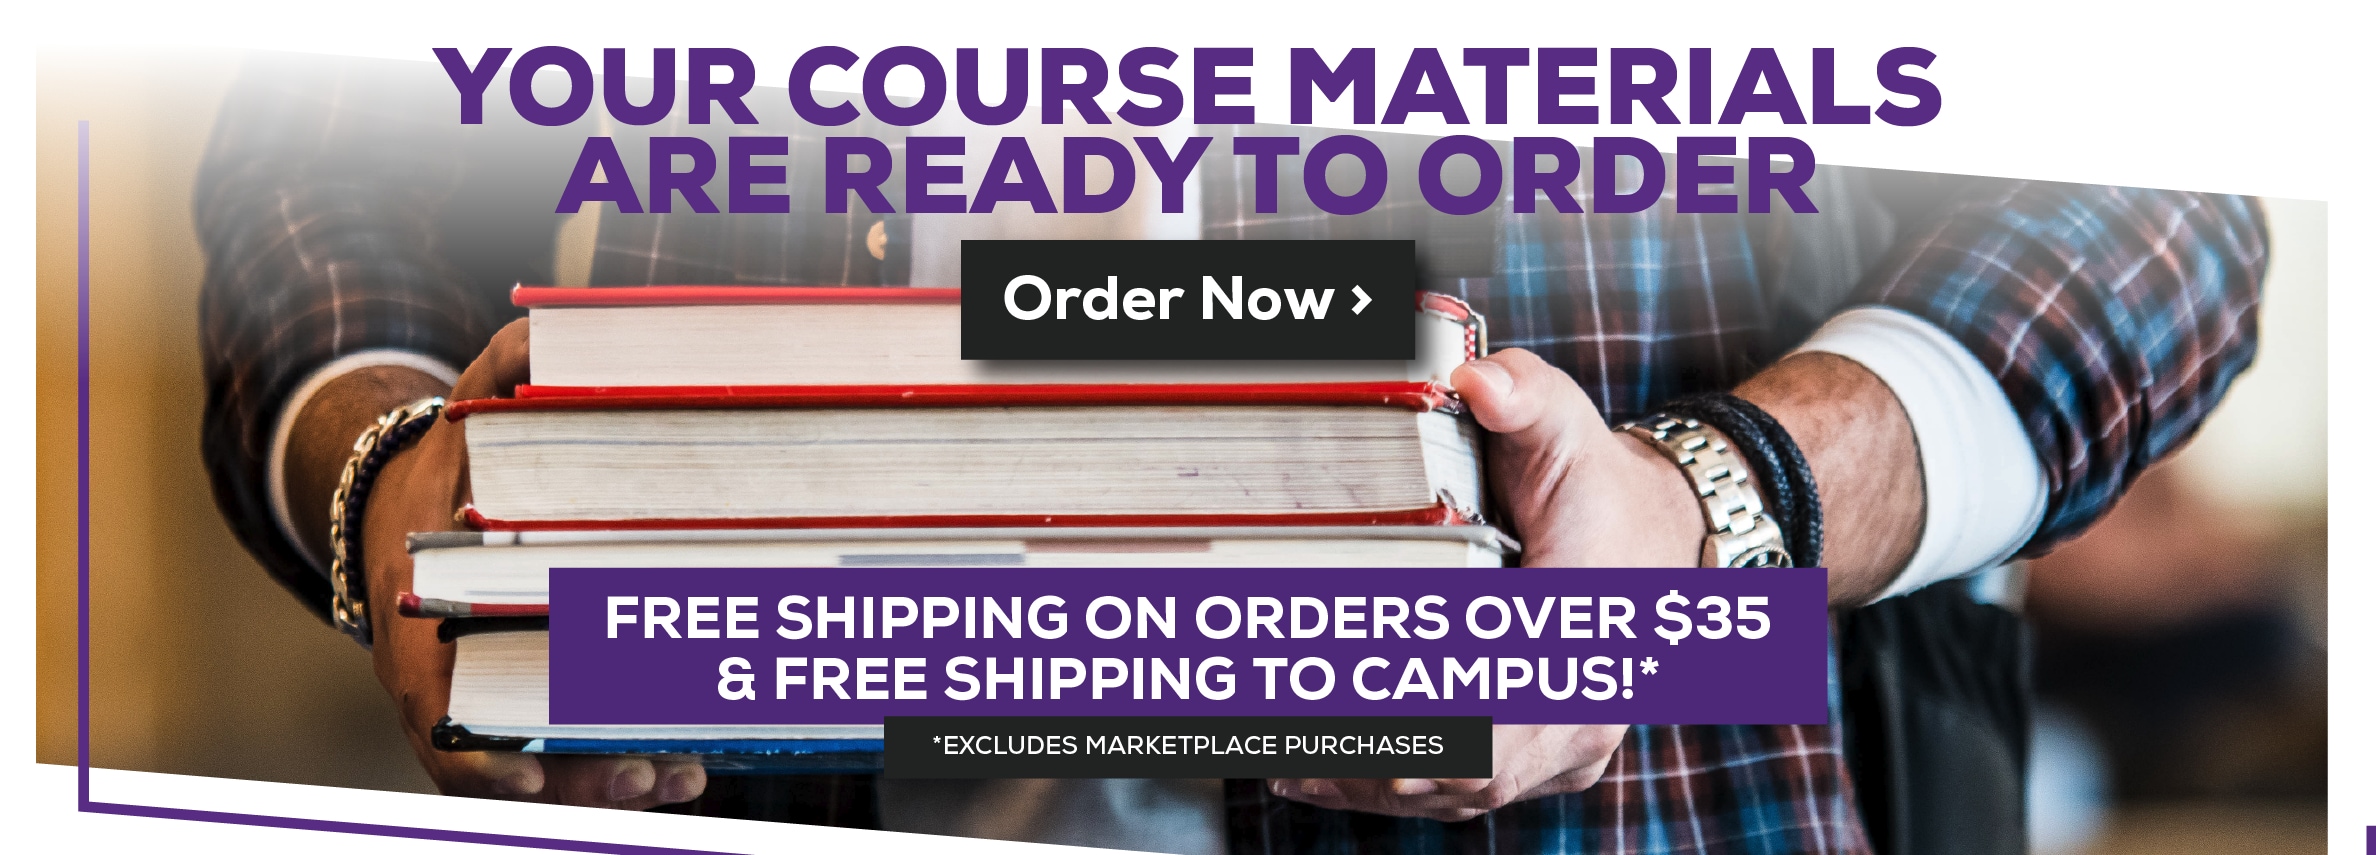 Your Course Materials are Ready to Order. Order Now. Free shipping on orders over $35 & free shipping to campus! *Excludes marketplace purchases.